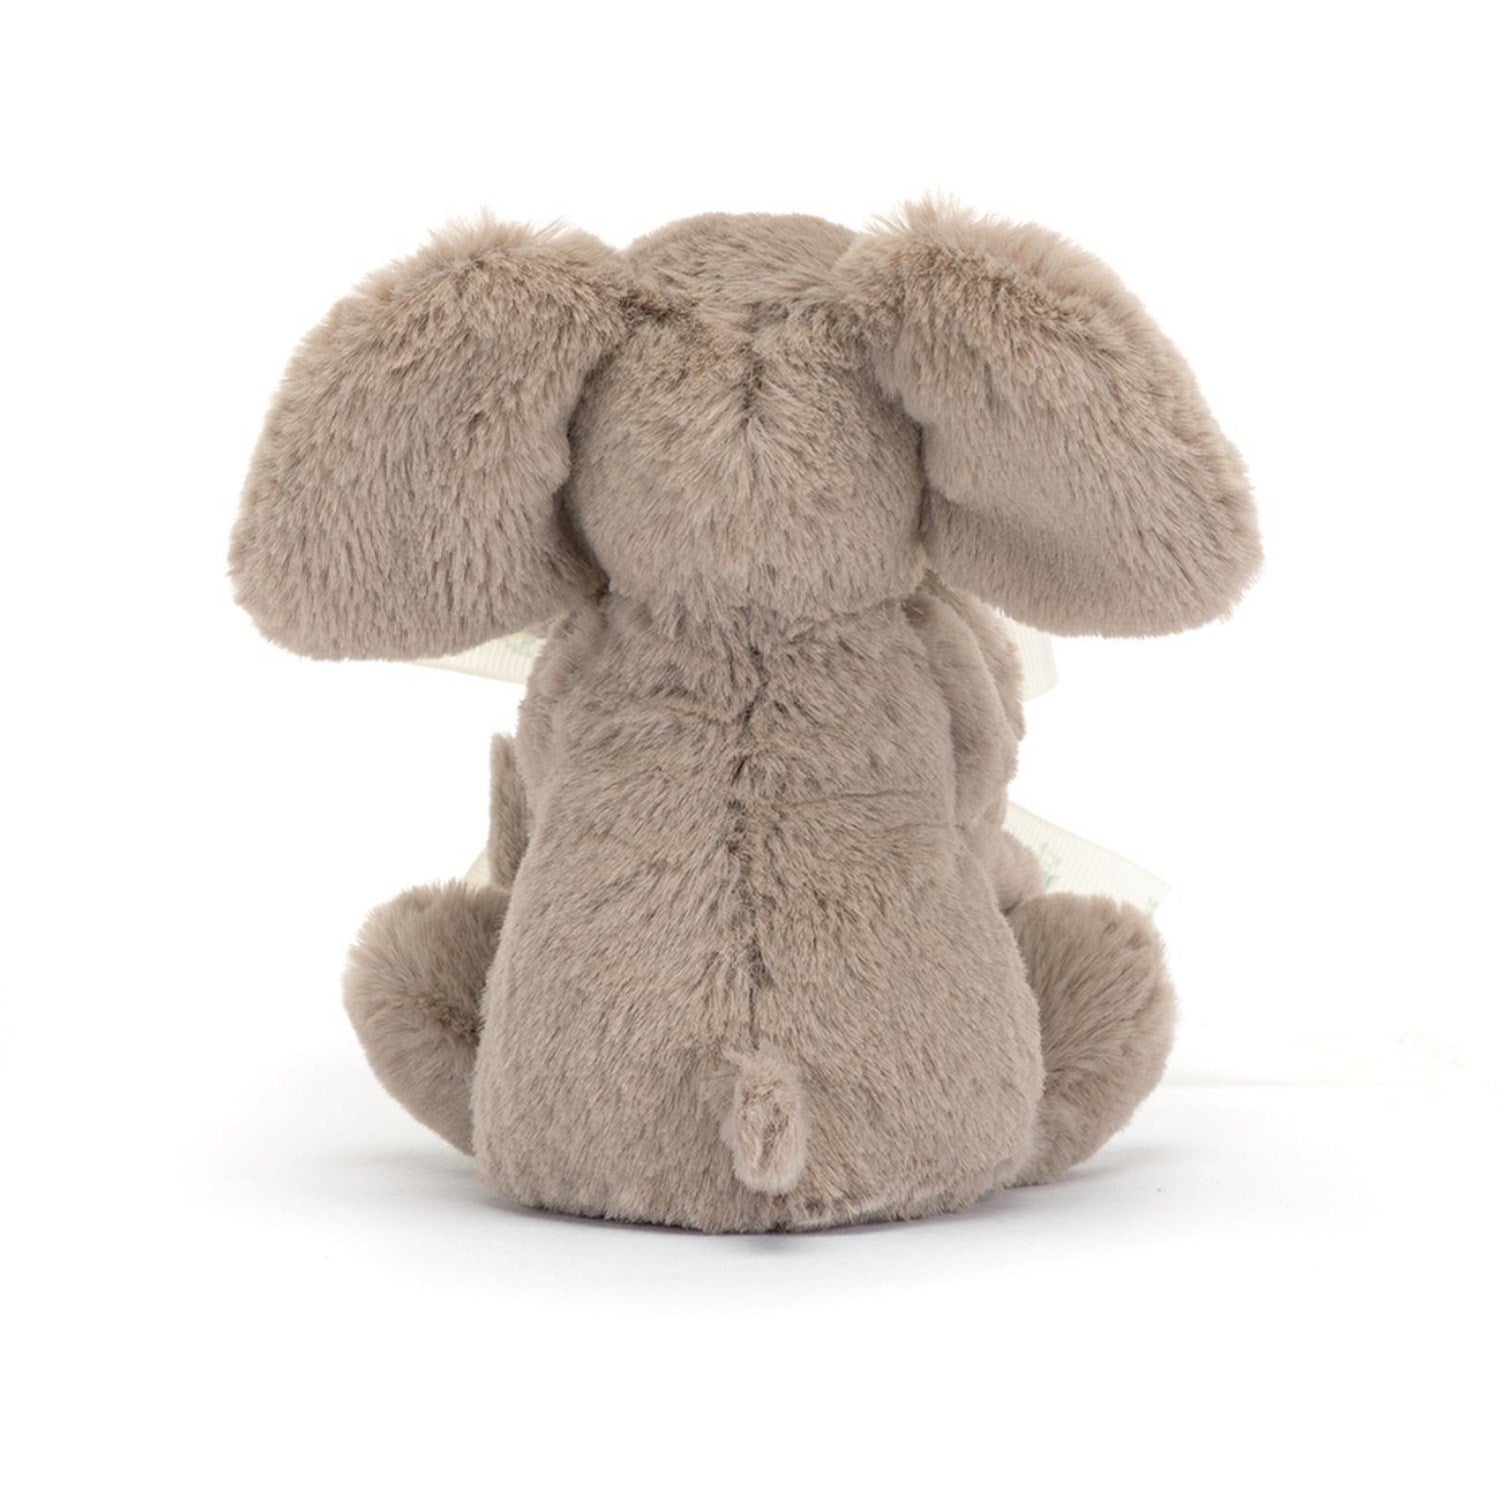 Jellycat Smudge Elephant Soother 5